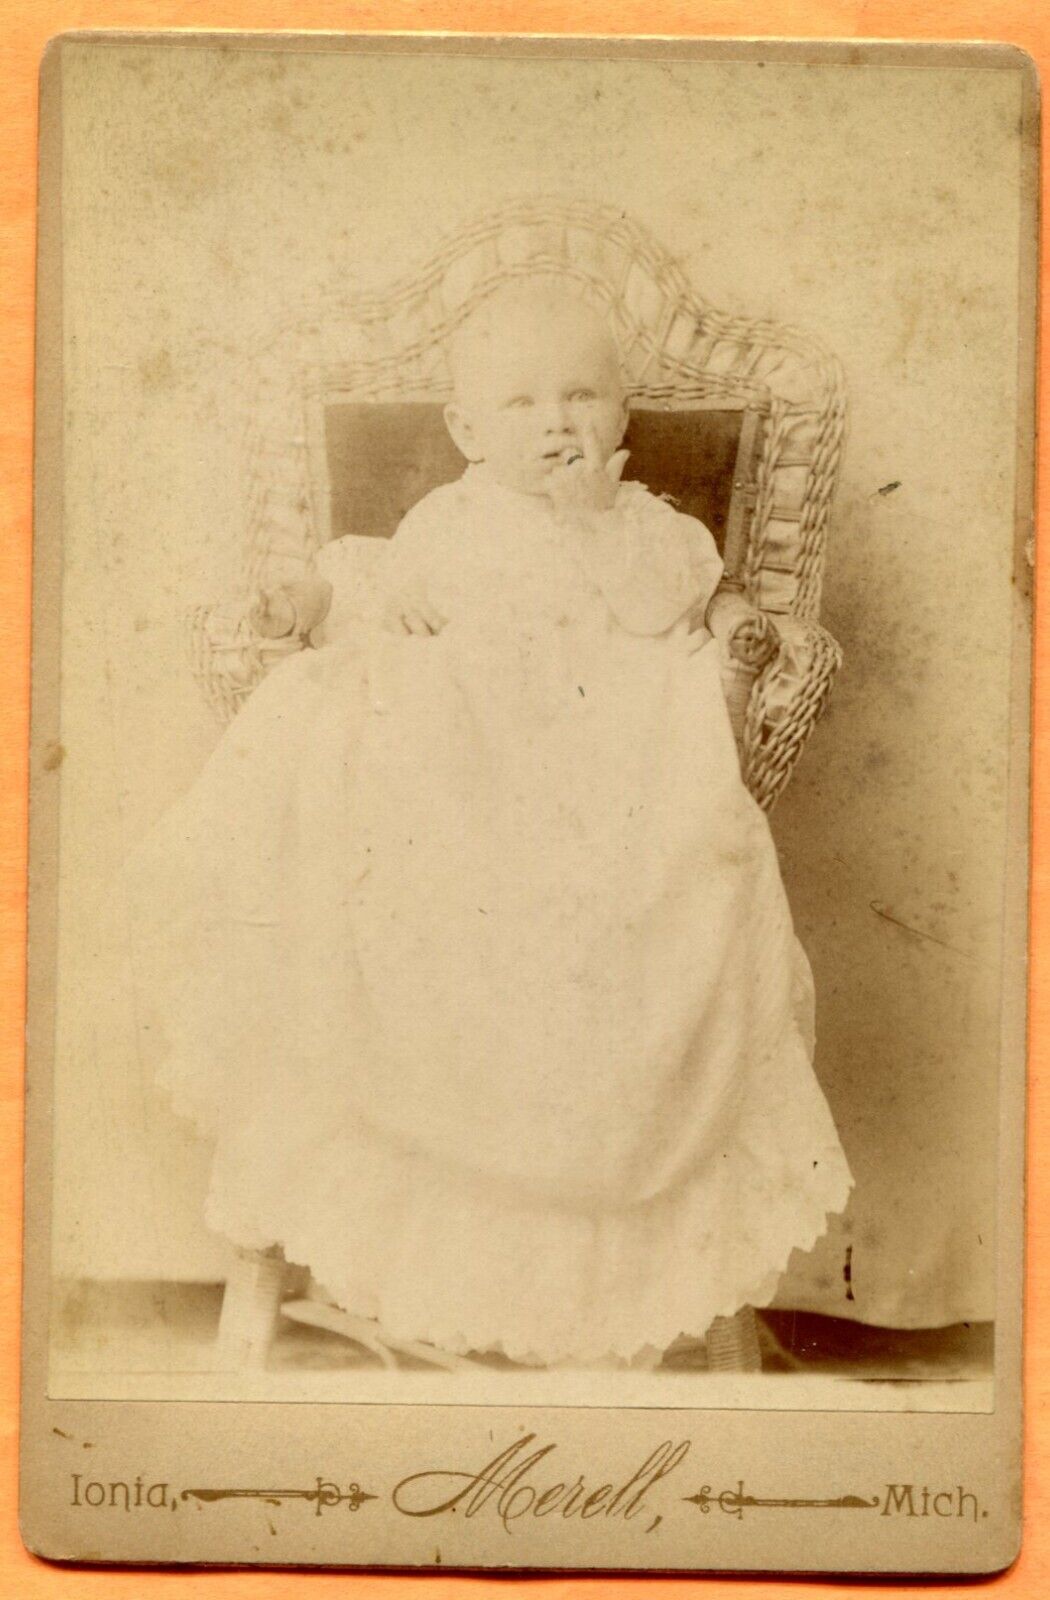 Ionia MI, Portrait of a Baby, by Merell circa 1880s